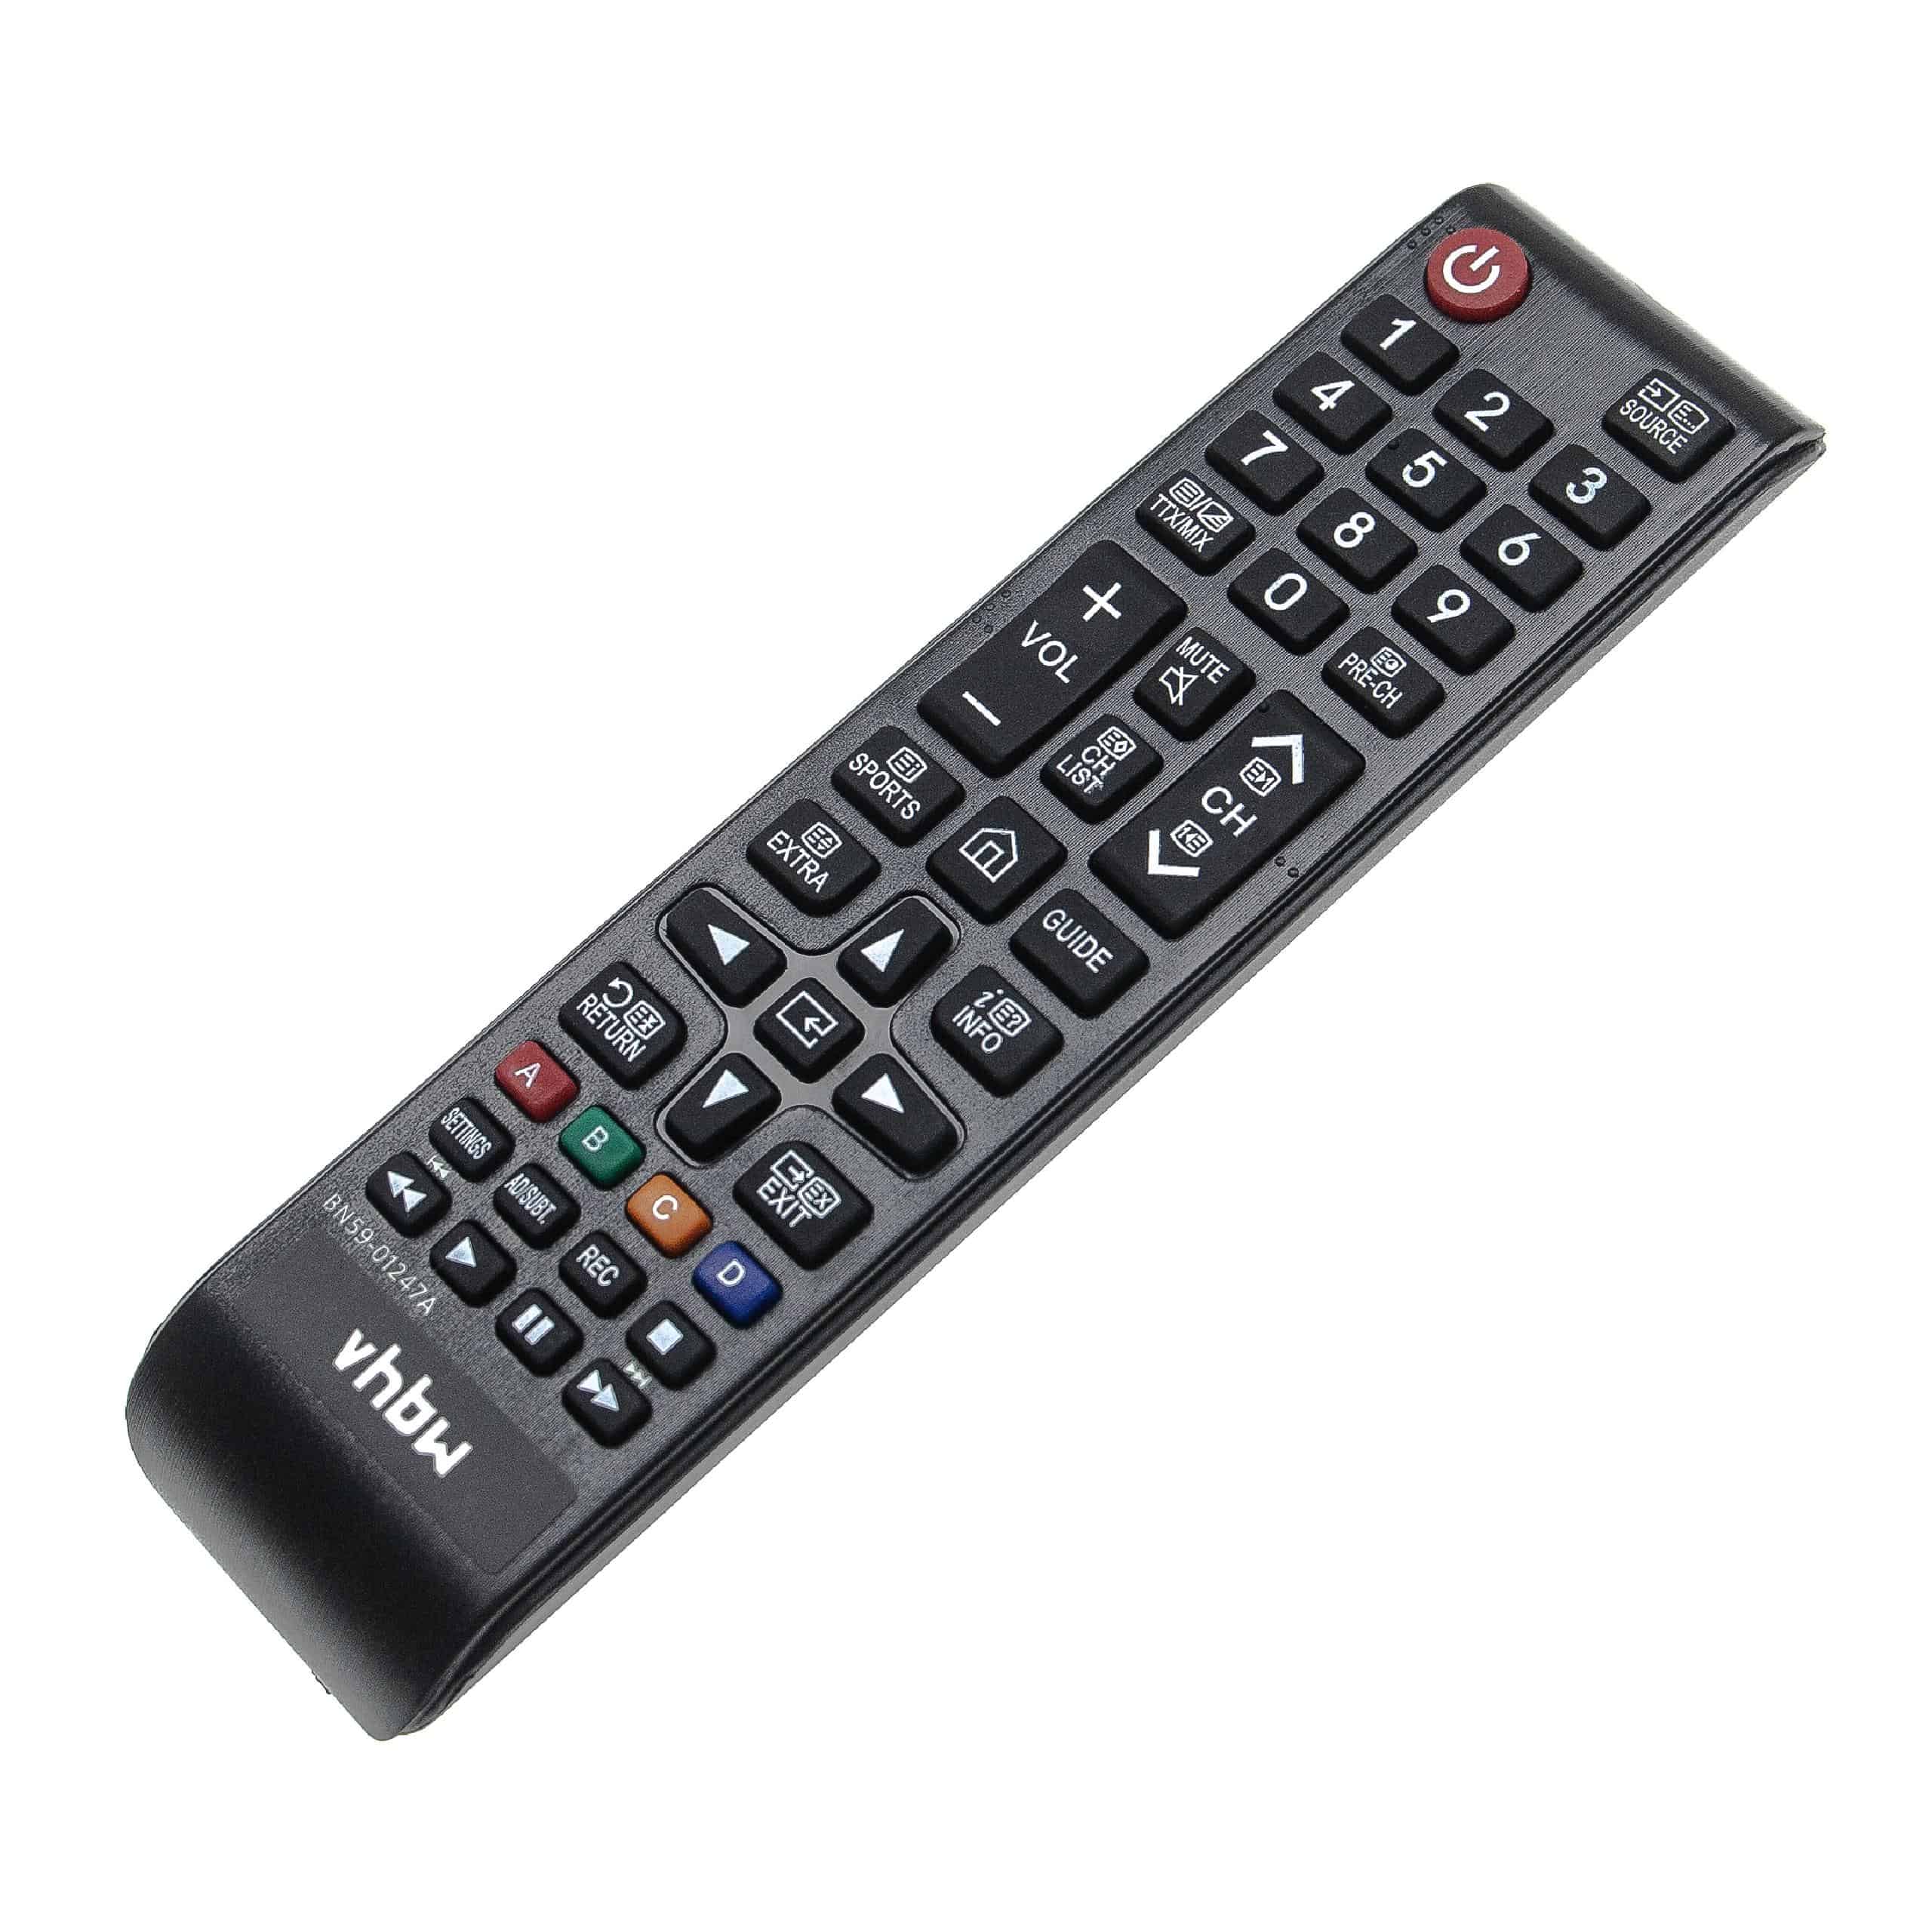 Remote Control replaces Samsung BN59-01247A for Samsung